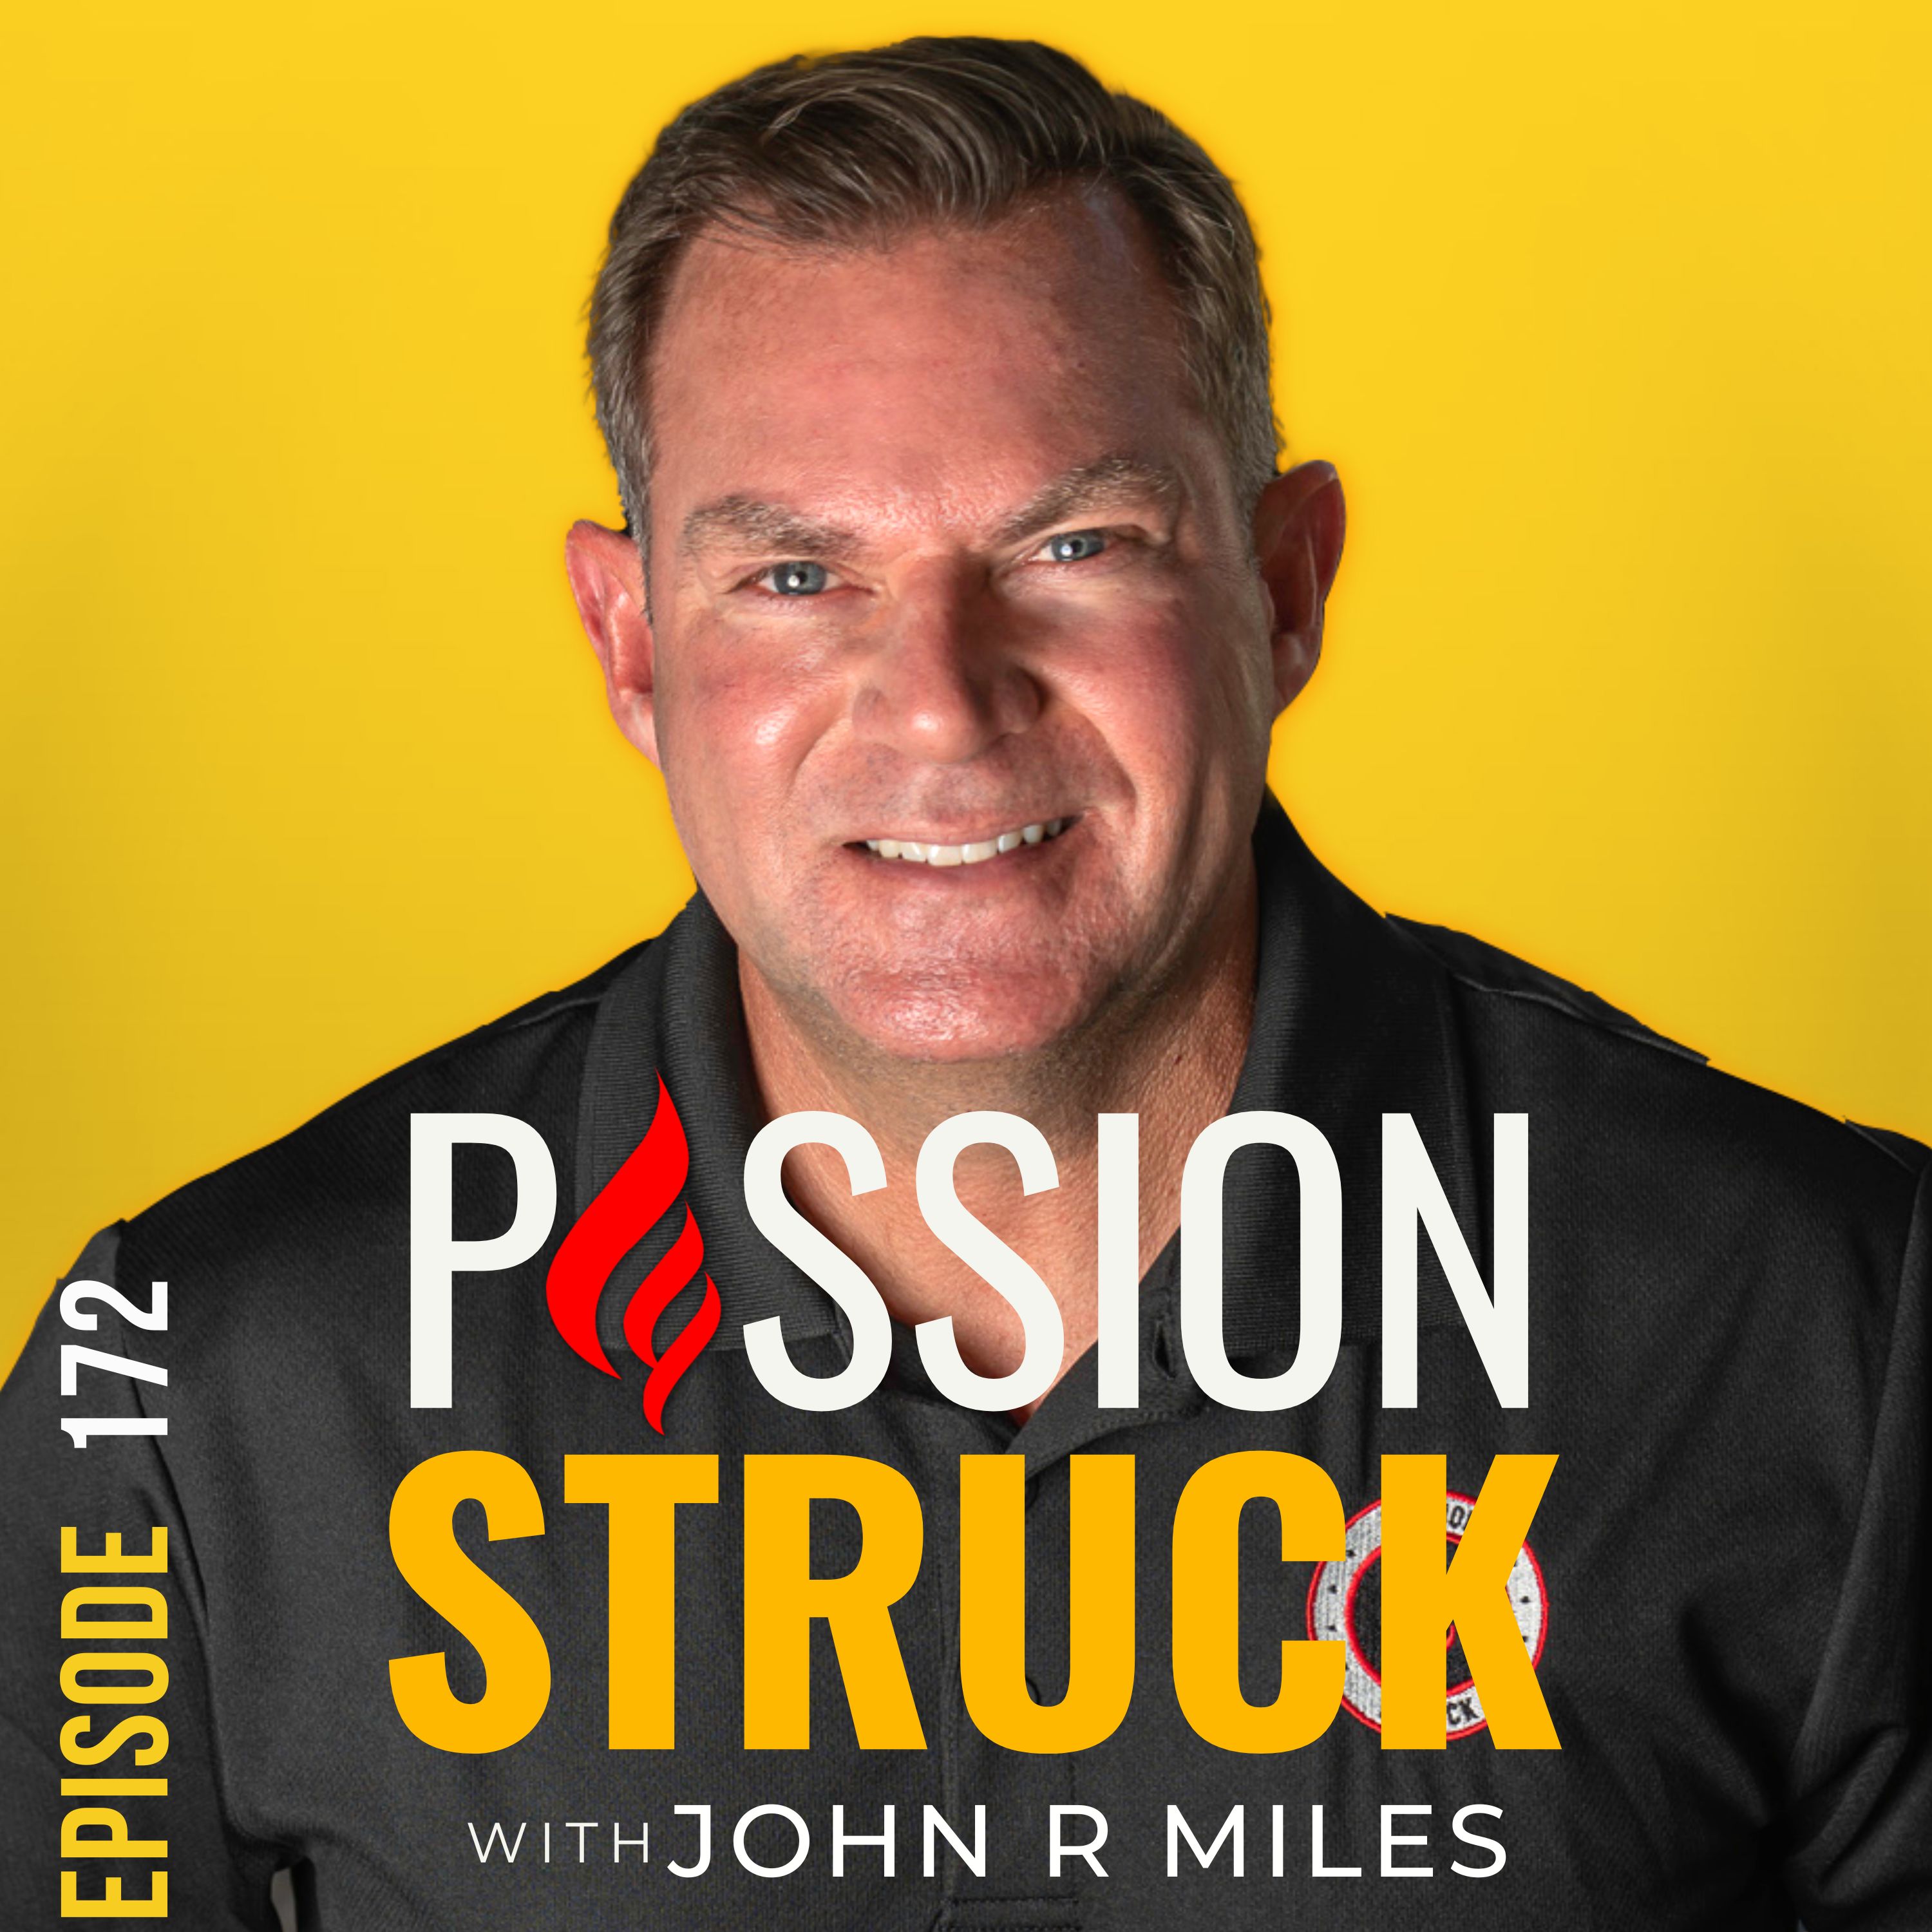 Passion Struck with John R. Miles thumbnail episode 172 on the consequences of abuse